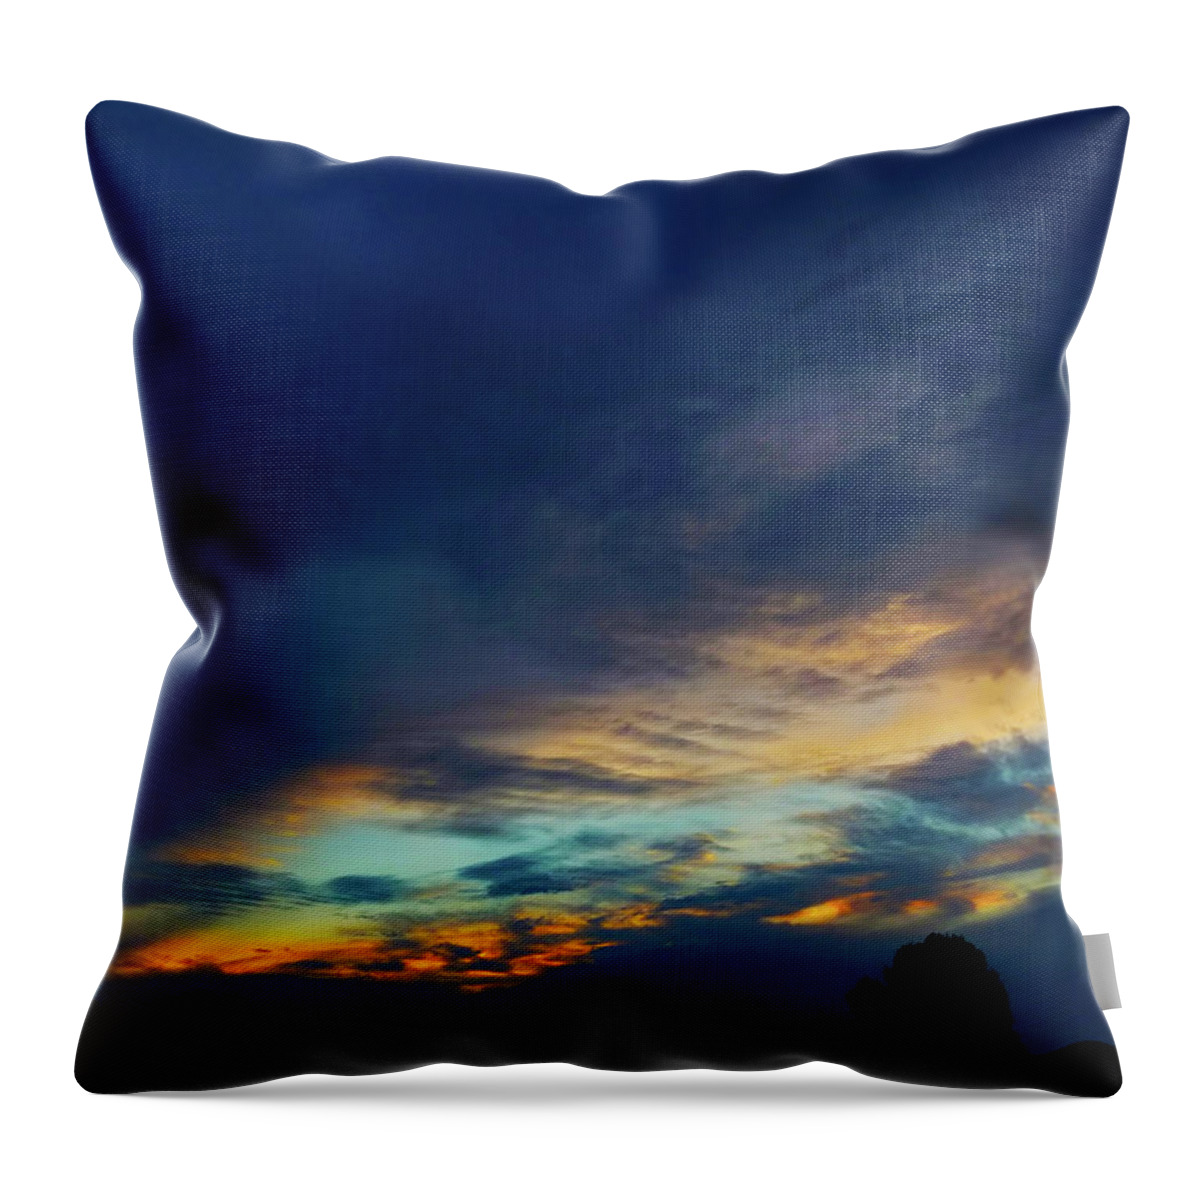 Sunset Throw Pillow featuring the photograph Yearning Sunset by Mark Blauhoefer